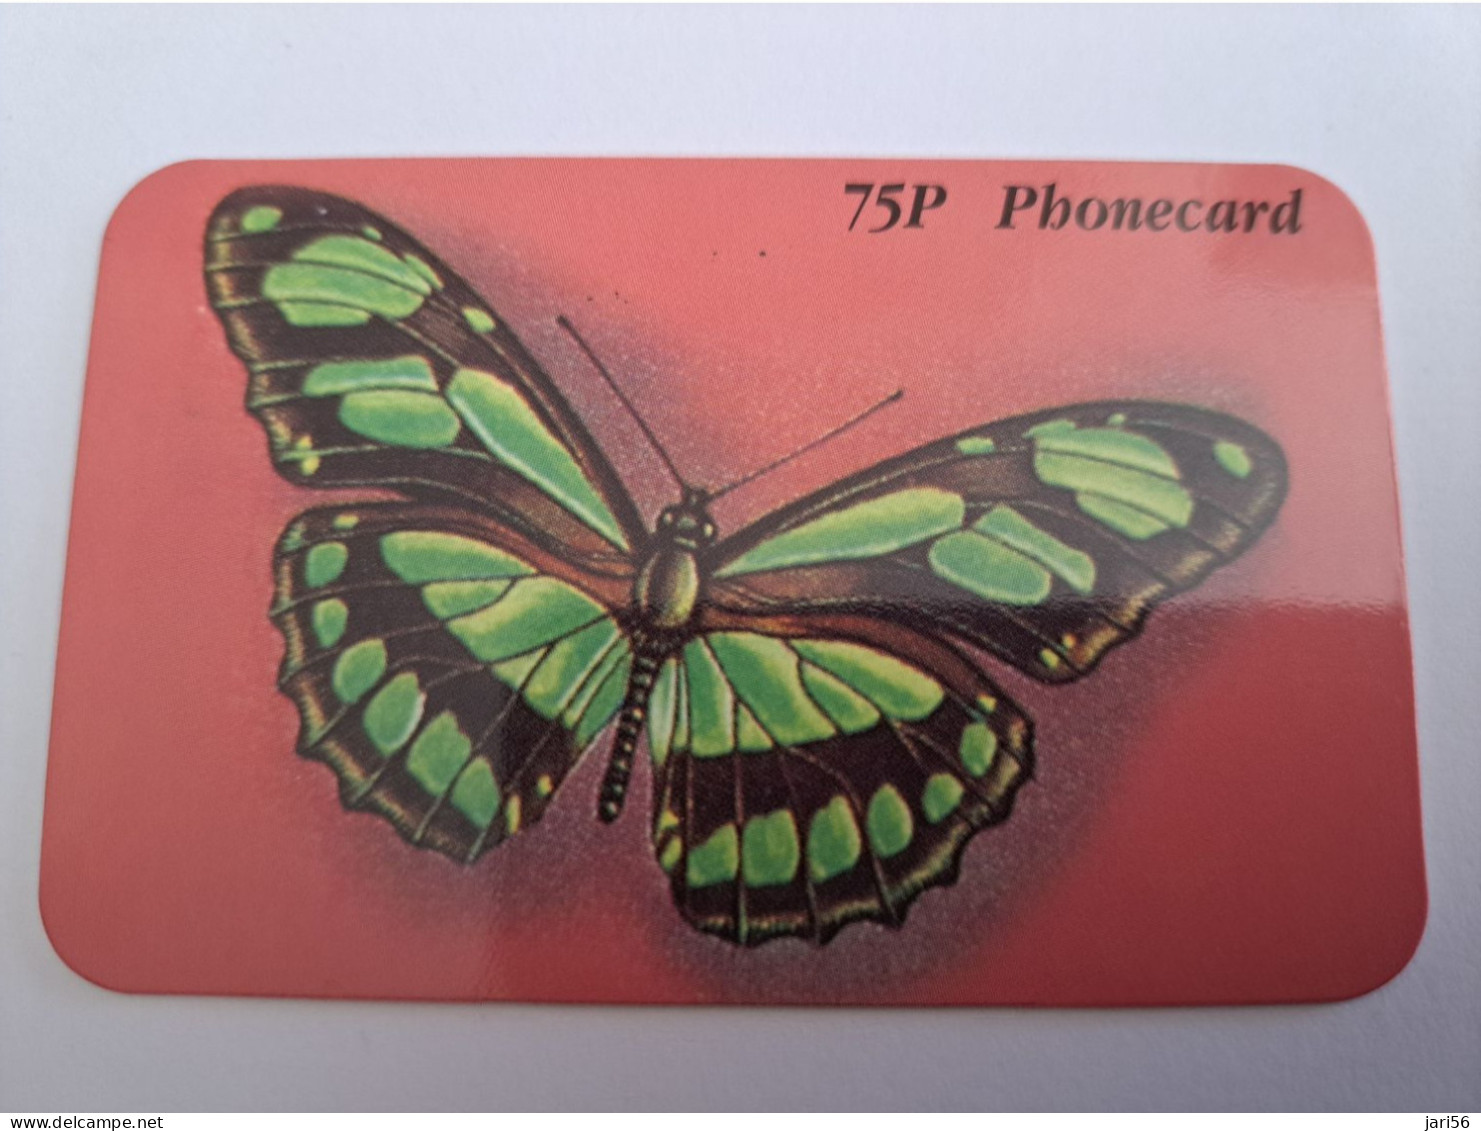 GREAT BRITAIN  / DISCOUNT PHONECARD/BUTTERFLY / 75 PENCE    PREPAID CARD / MINT      **13586** - Collezioni